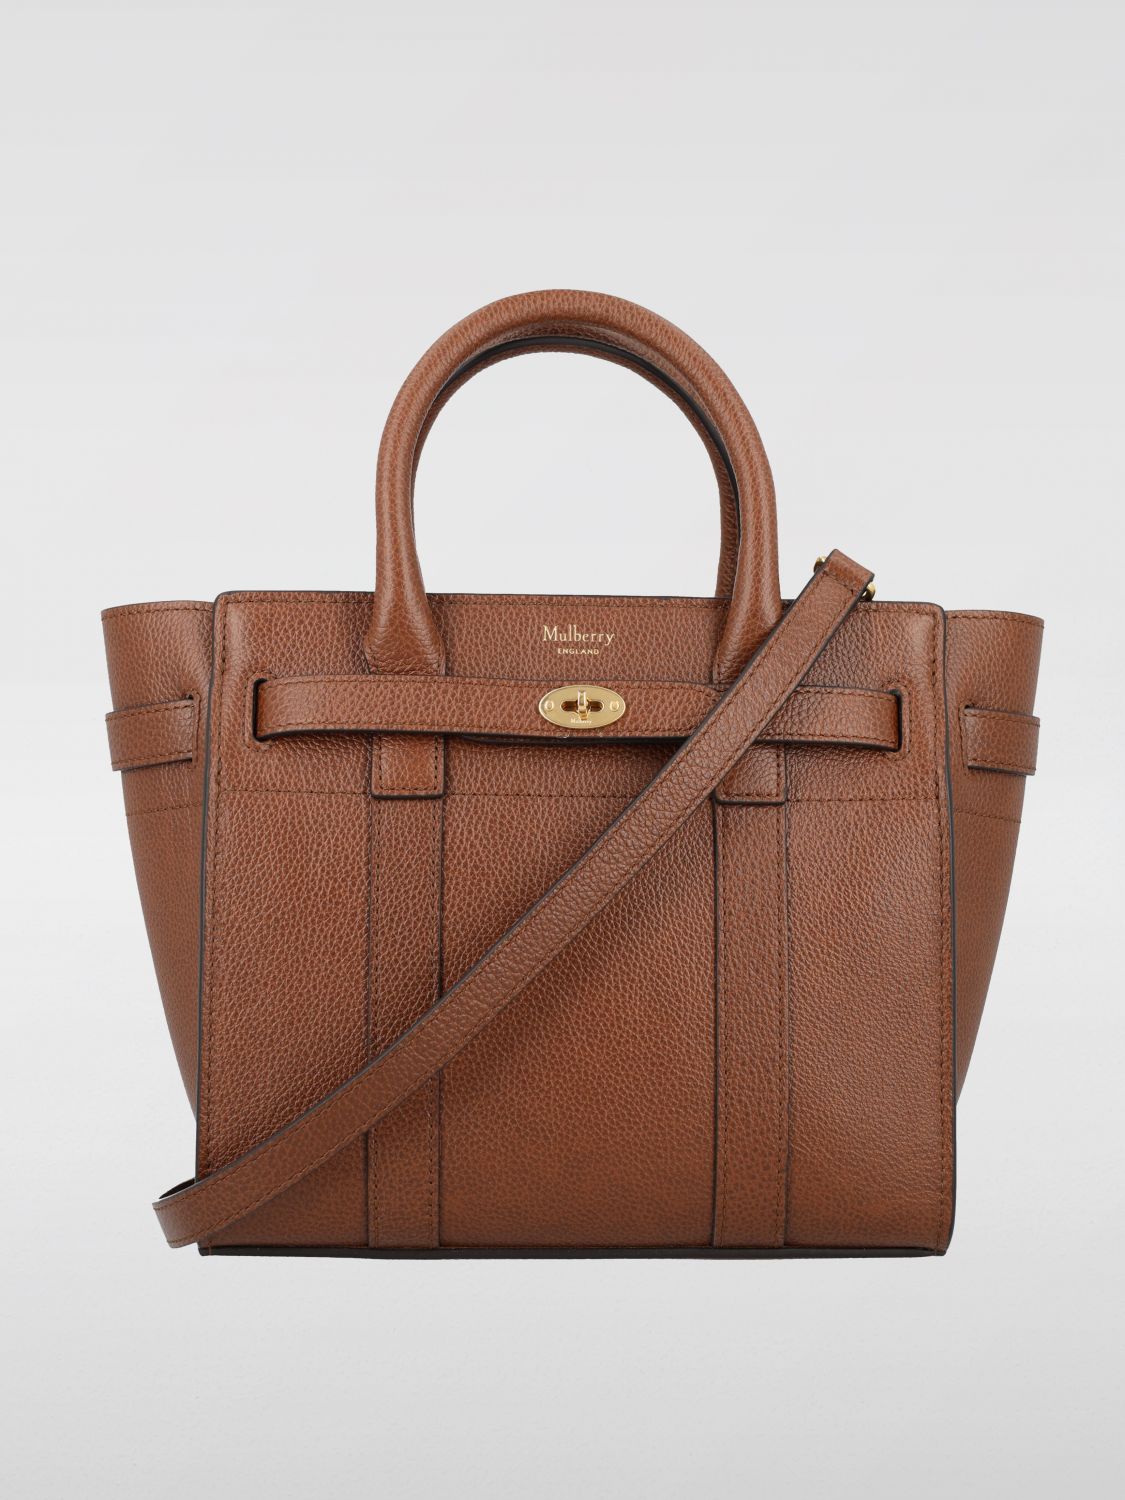 Mulberry Handbag MULBERRY Woman color Brown